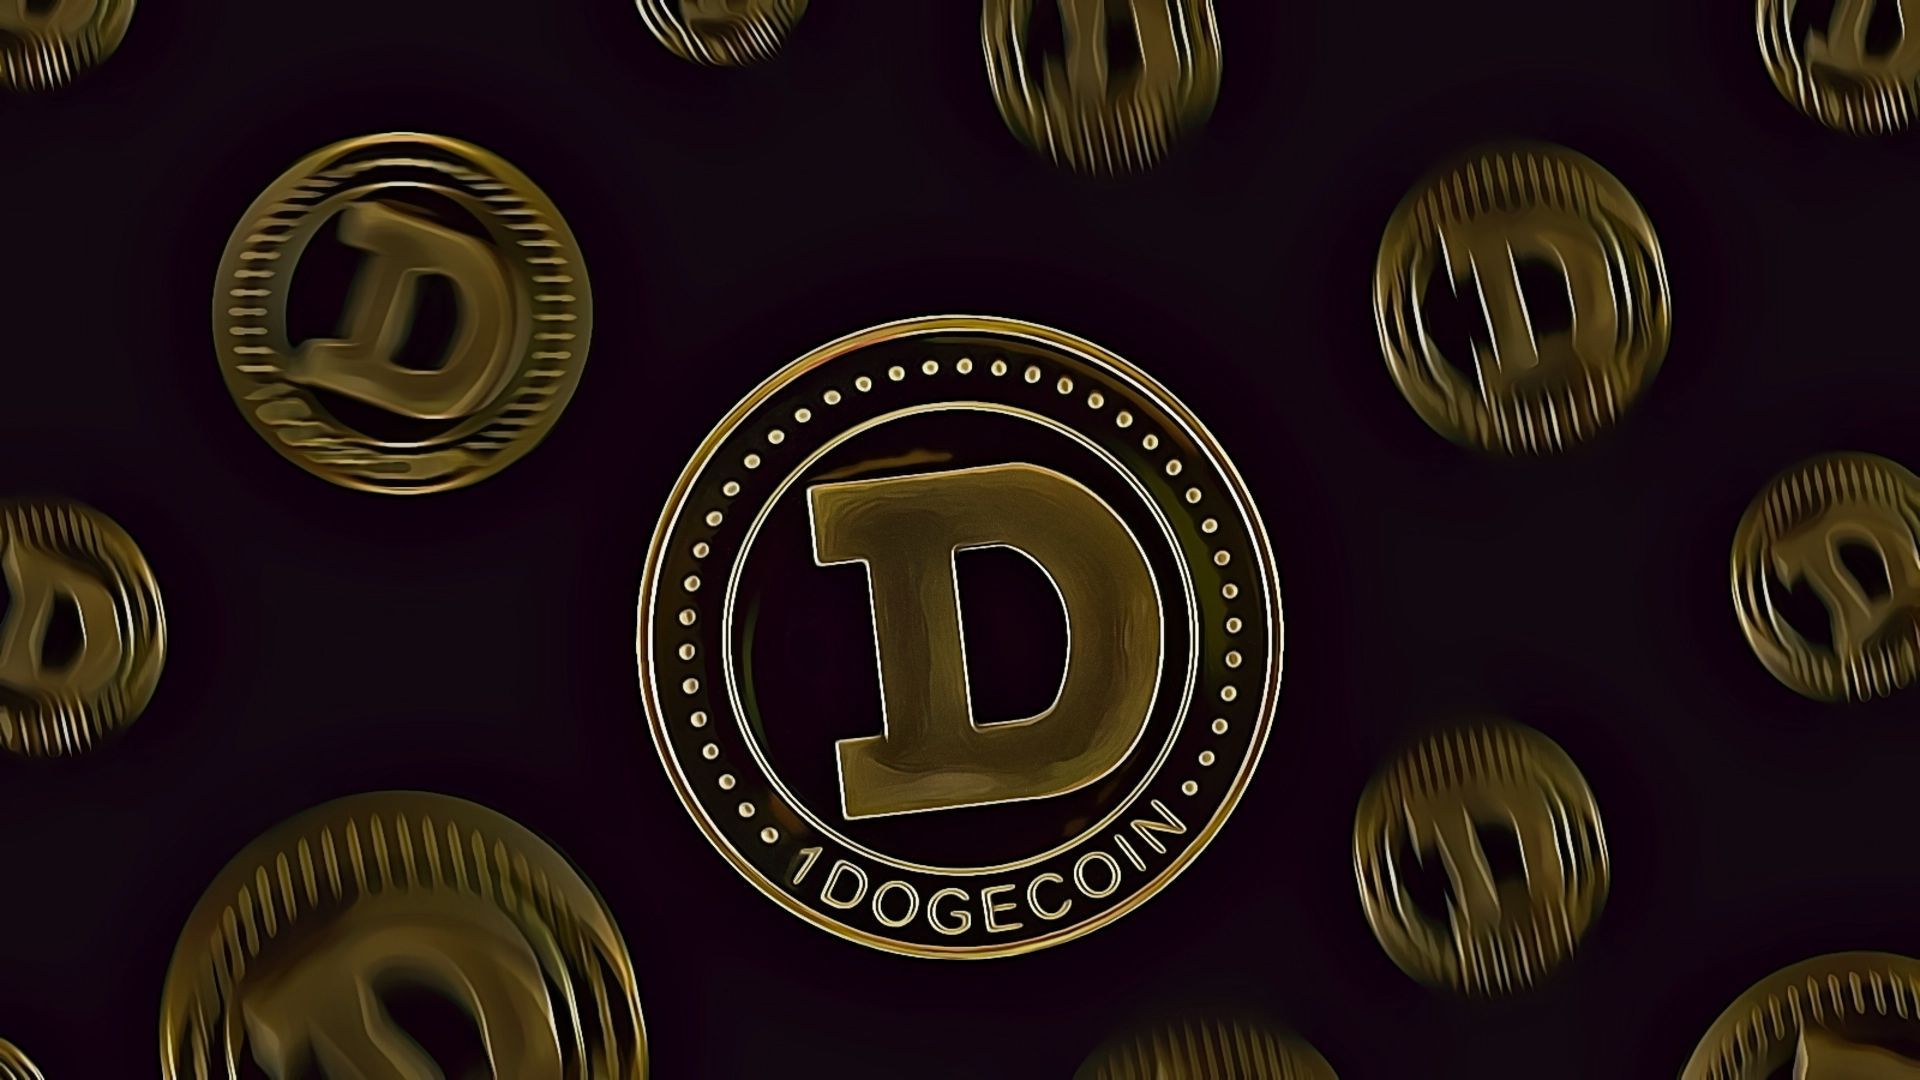 dogechain projects